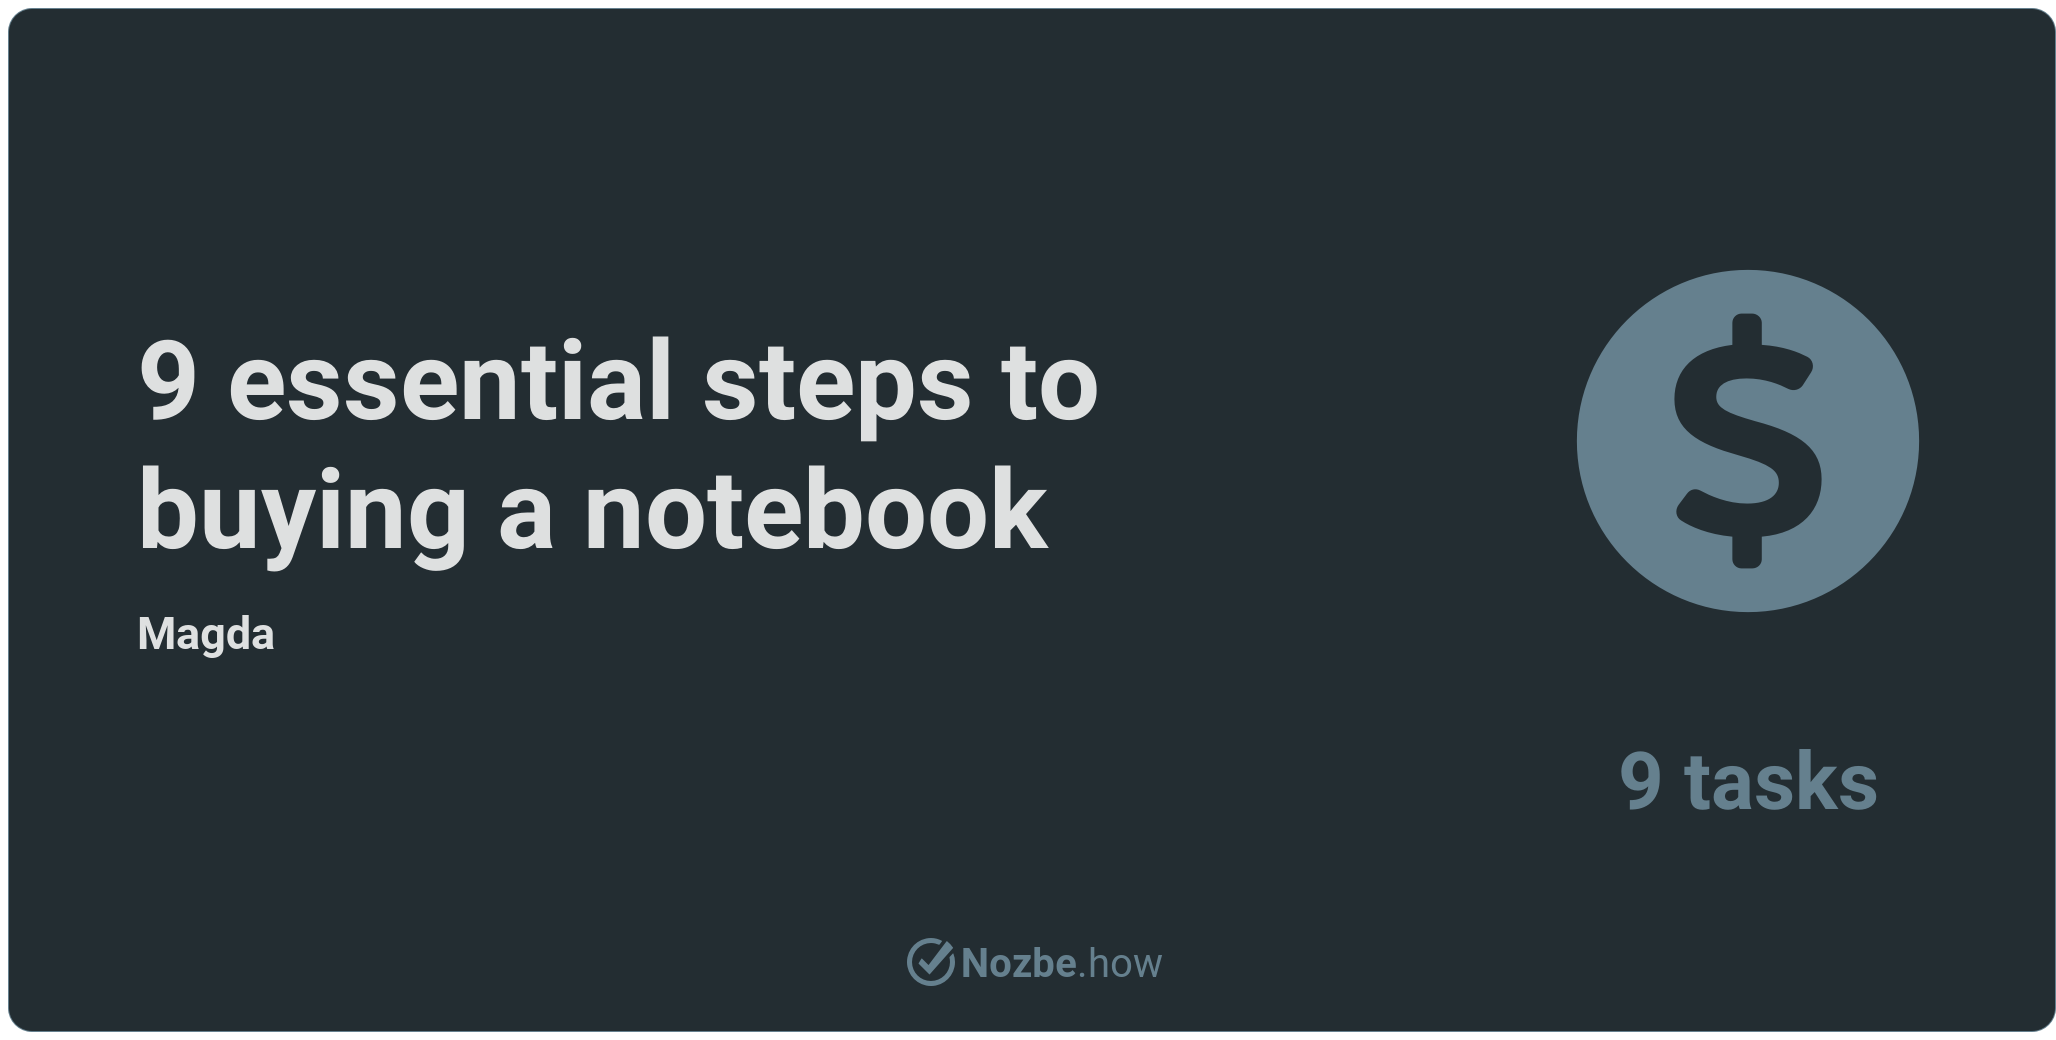 9 essential steps to buying a notebook